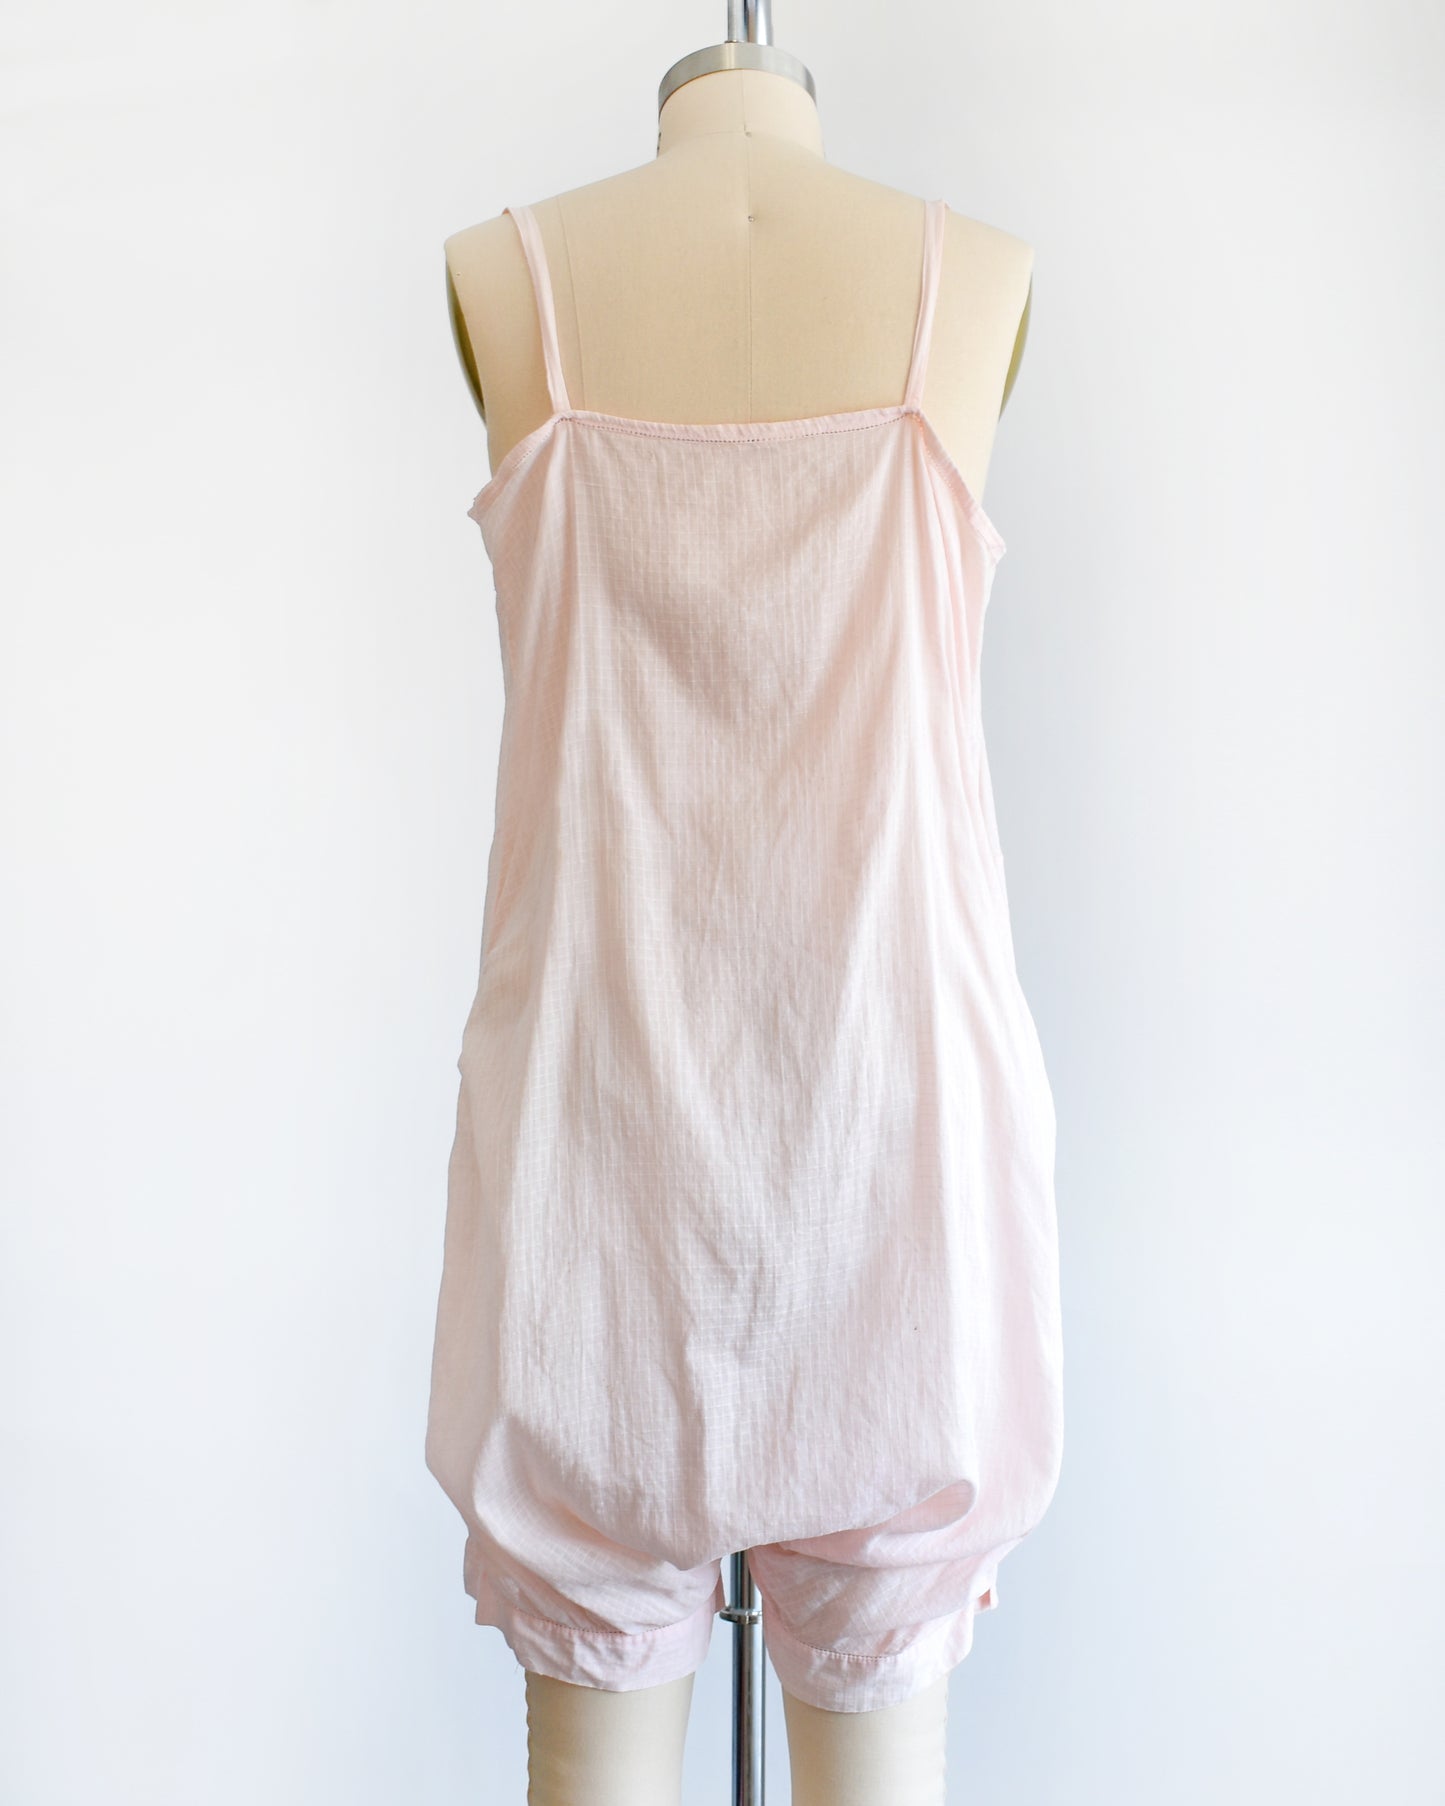 Back view of a vintage 1920s light pink chemise step in, which has spaghetti straps, square neckline, and snap buttons on the right side. The garment is on a dress form.